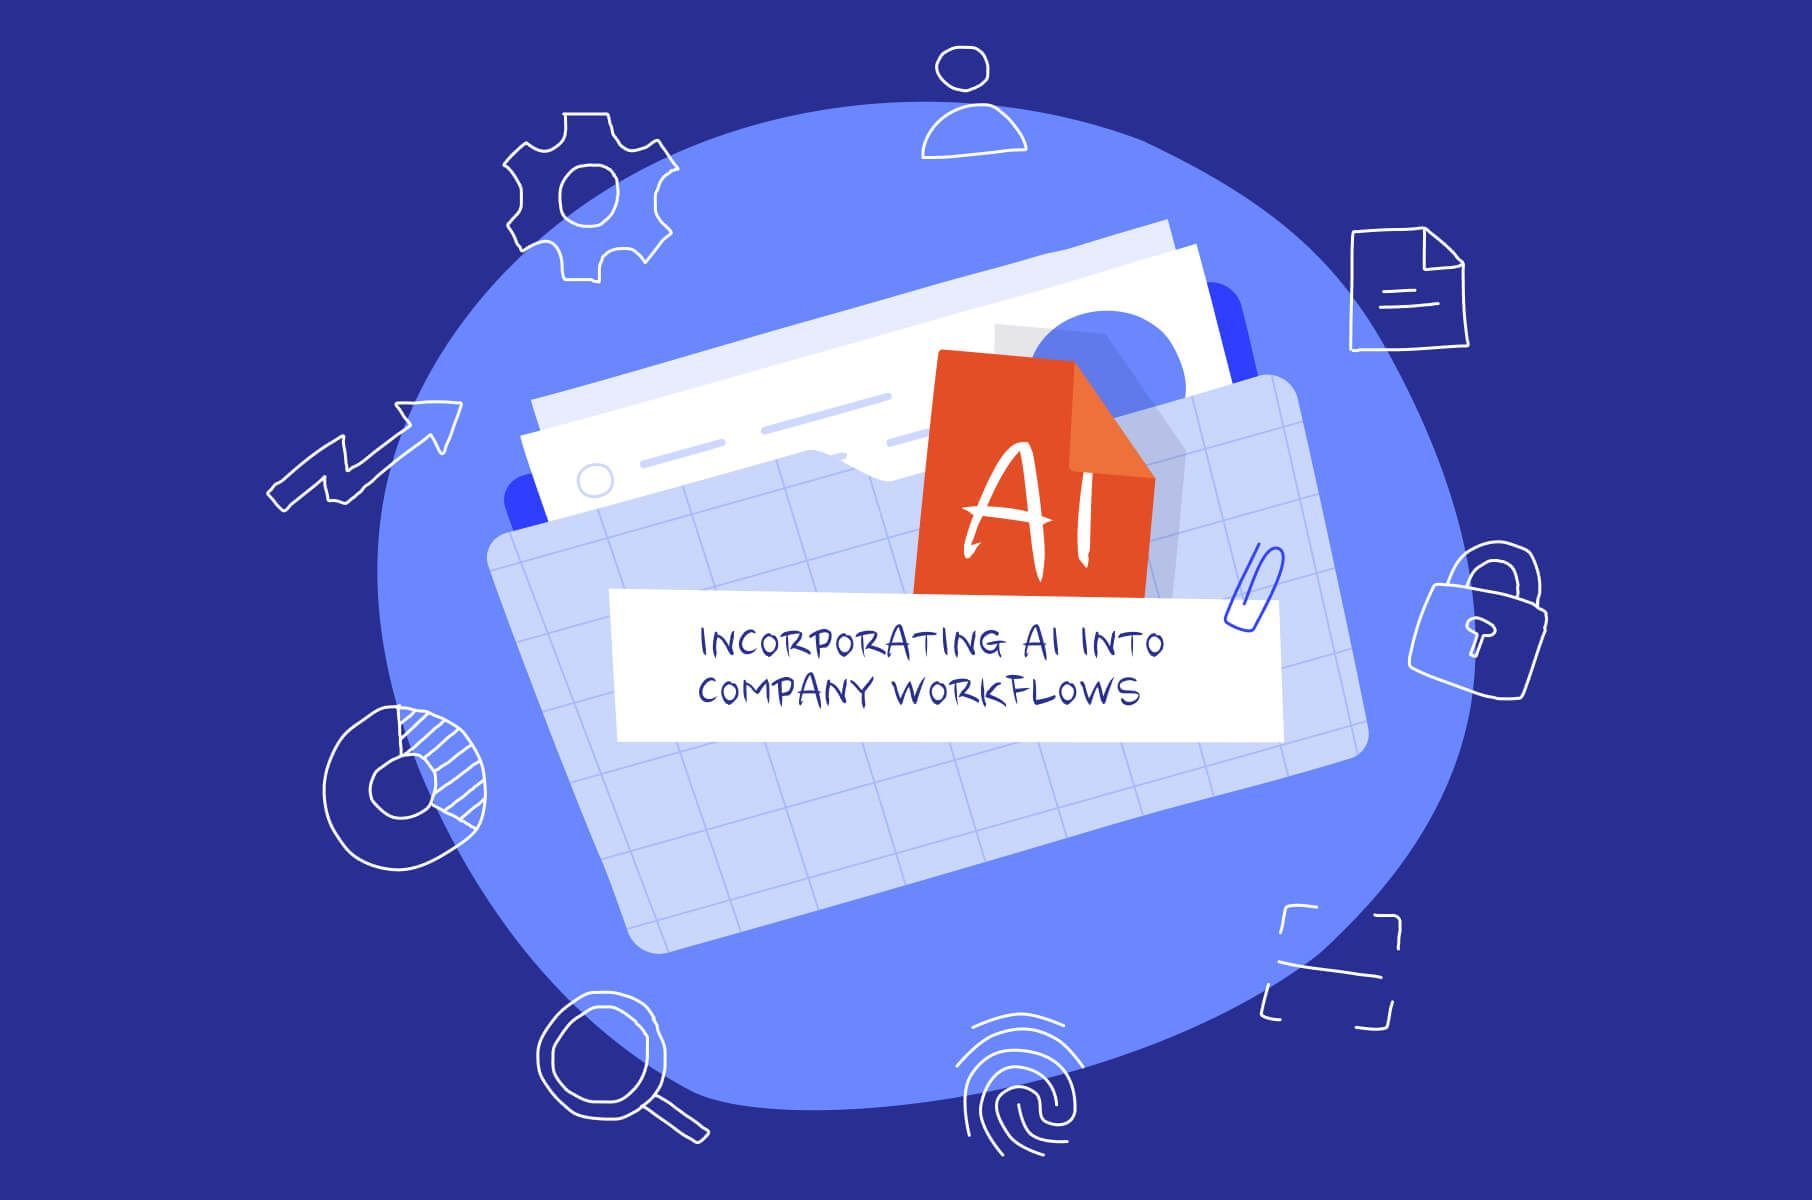 How incorporating AI into company workflows can streamline processes